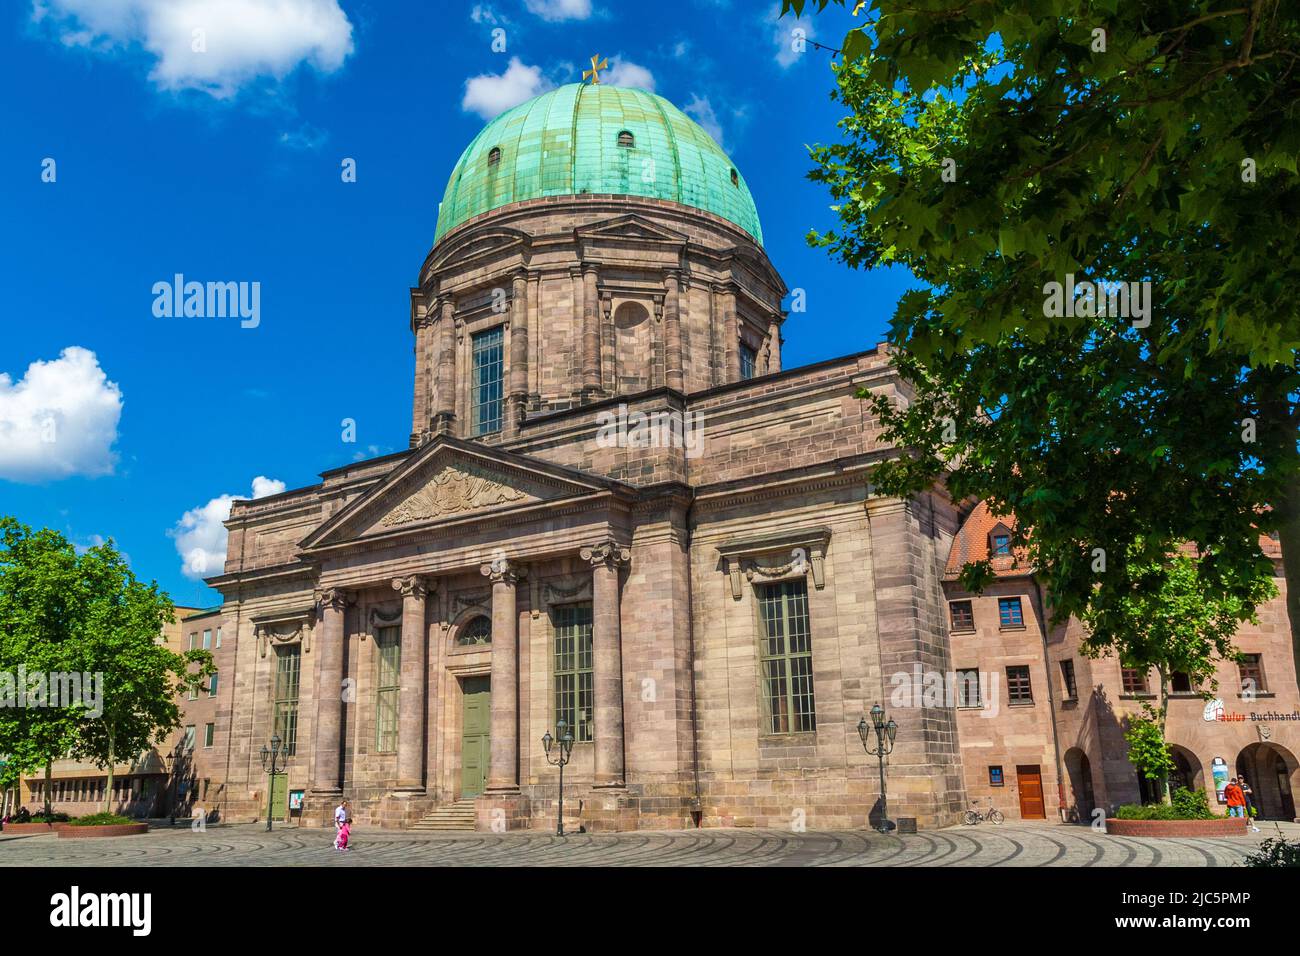 Lovely view of the St. Elizabeth's church with a high portal framed by columns with pilasters and a pediment, on a sunny summer day in Nuremberg,... Stock Photo